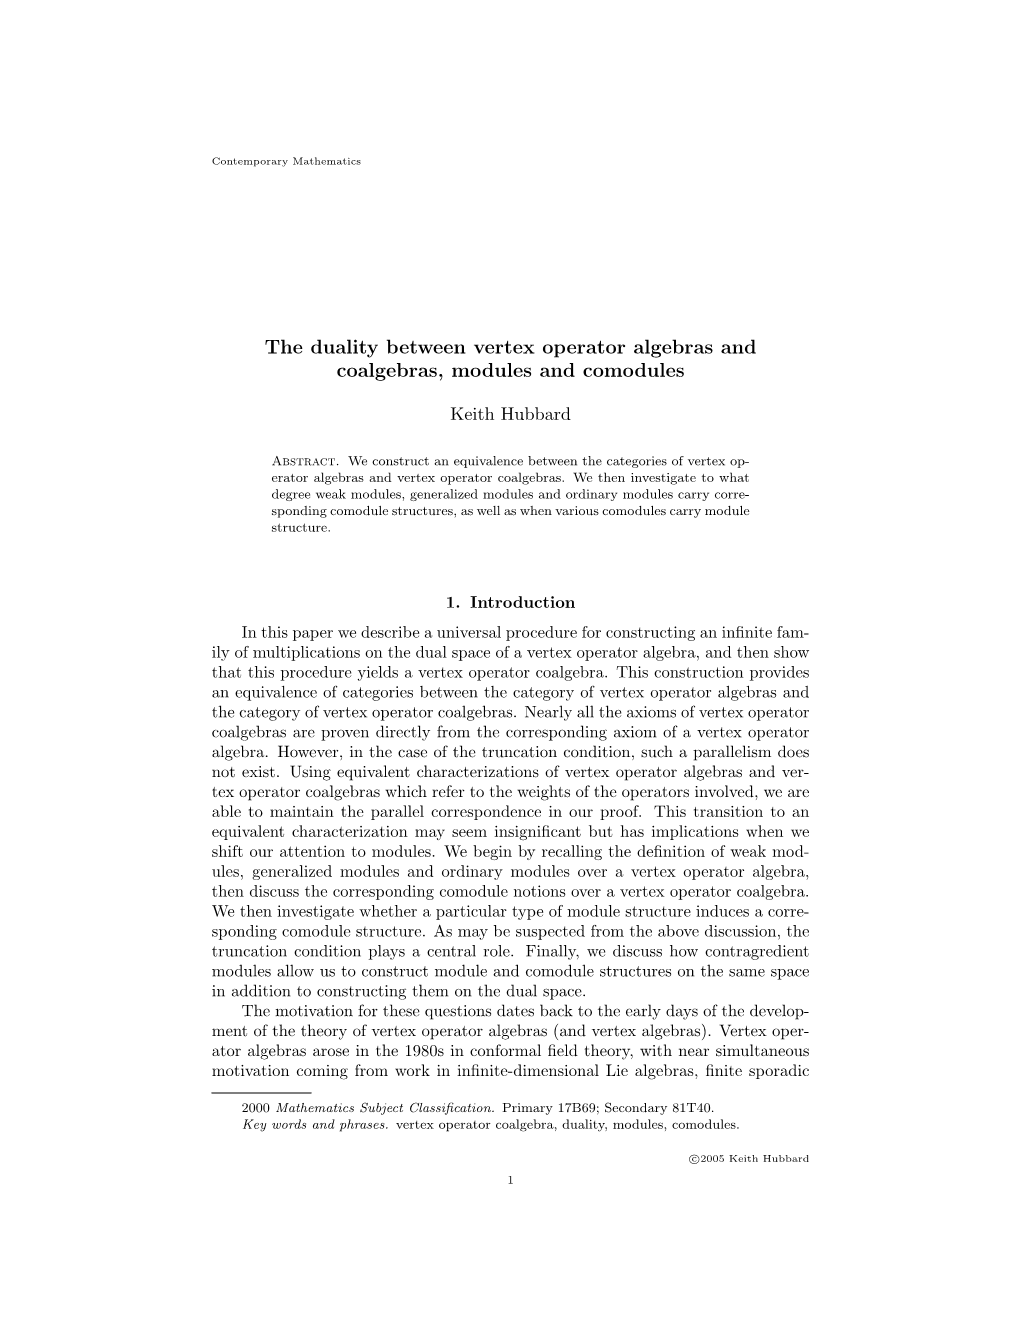 The Duality Between Vertex Operator Algebras and Coalgebras, Modules and Comodules